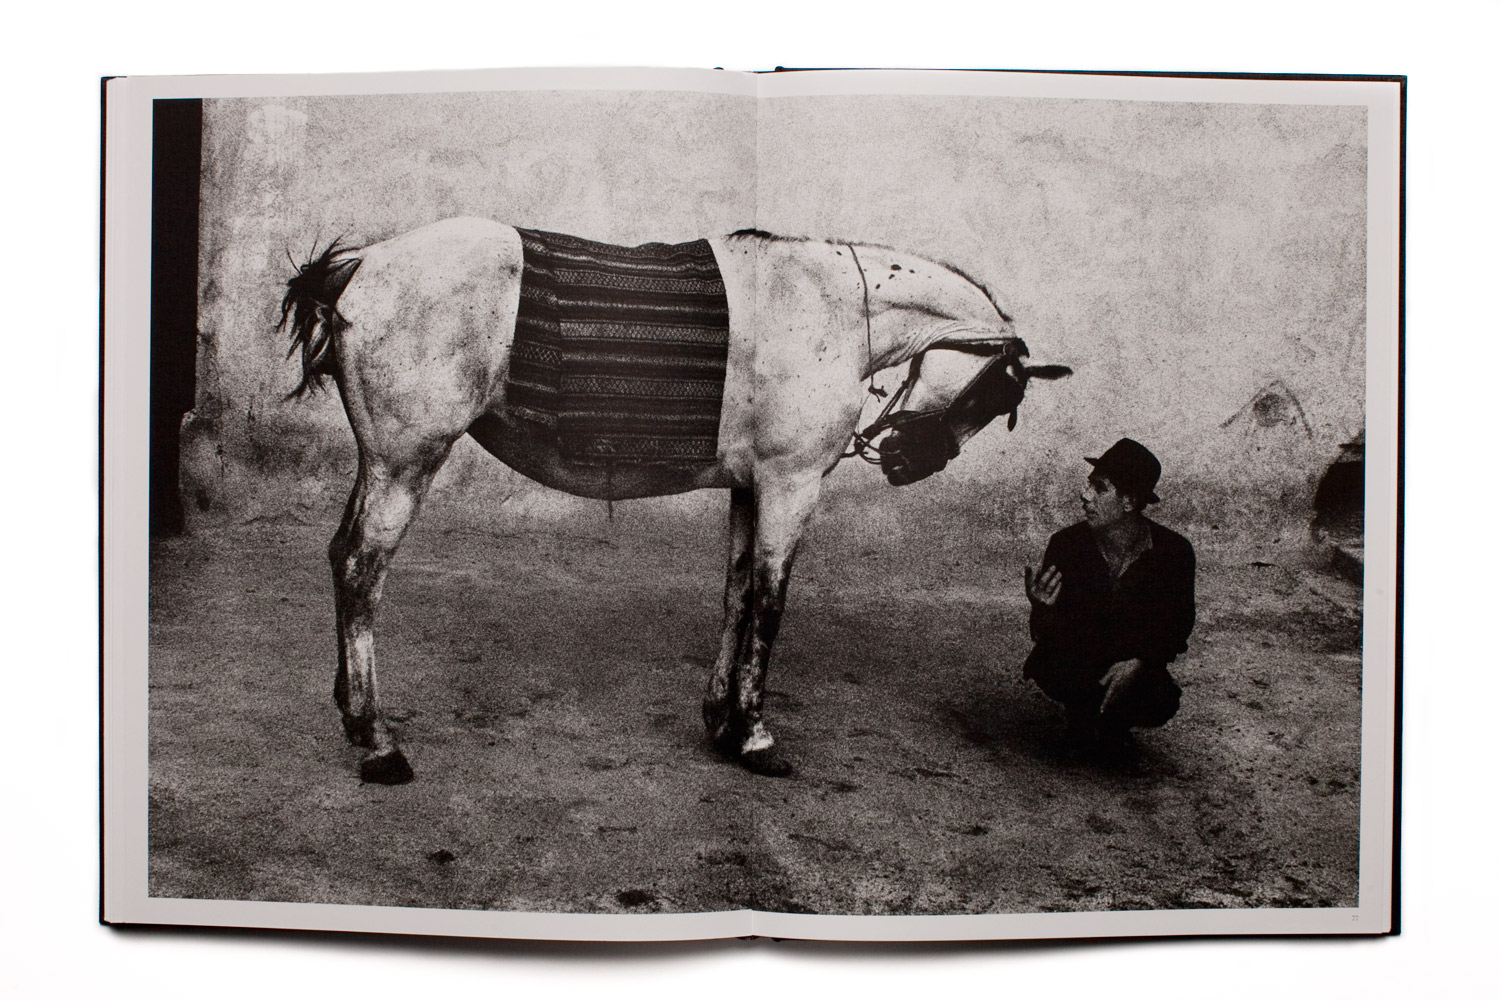 The republished Gypsies reveals dozens of remarkable images that have mostly remained unseen. It also includes iconic images that were inexplicably edited out from the original printing.